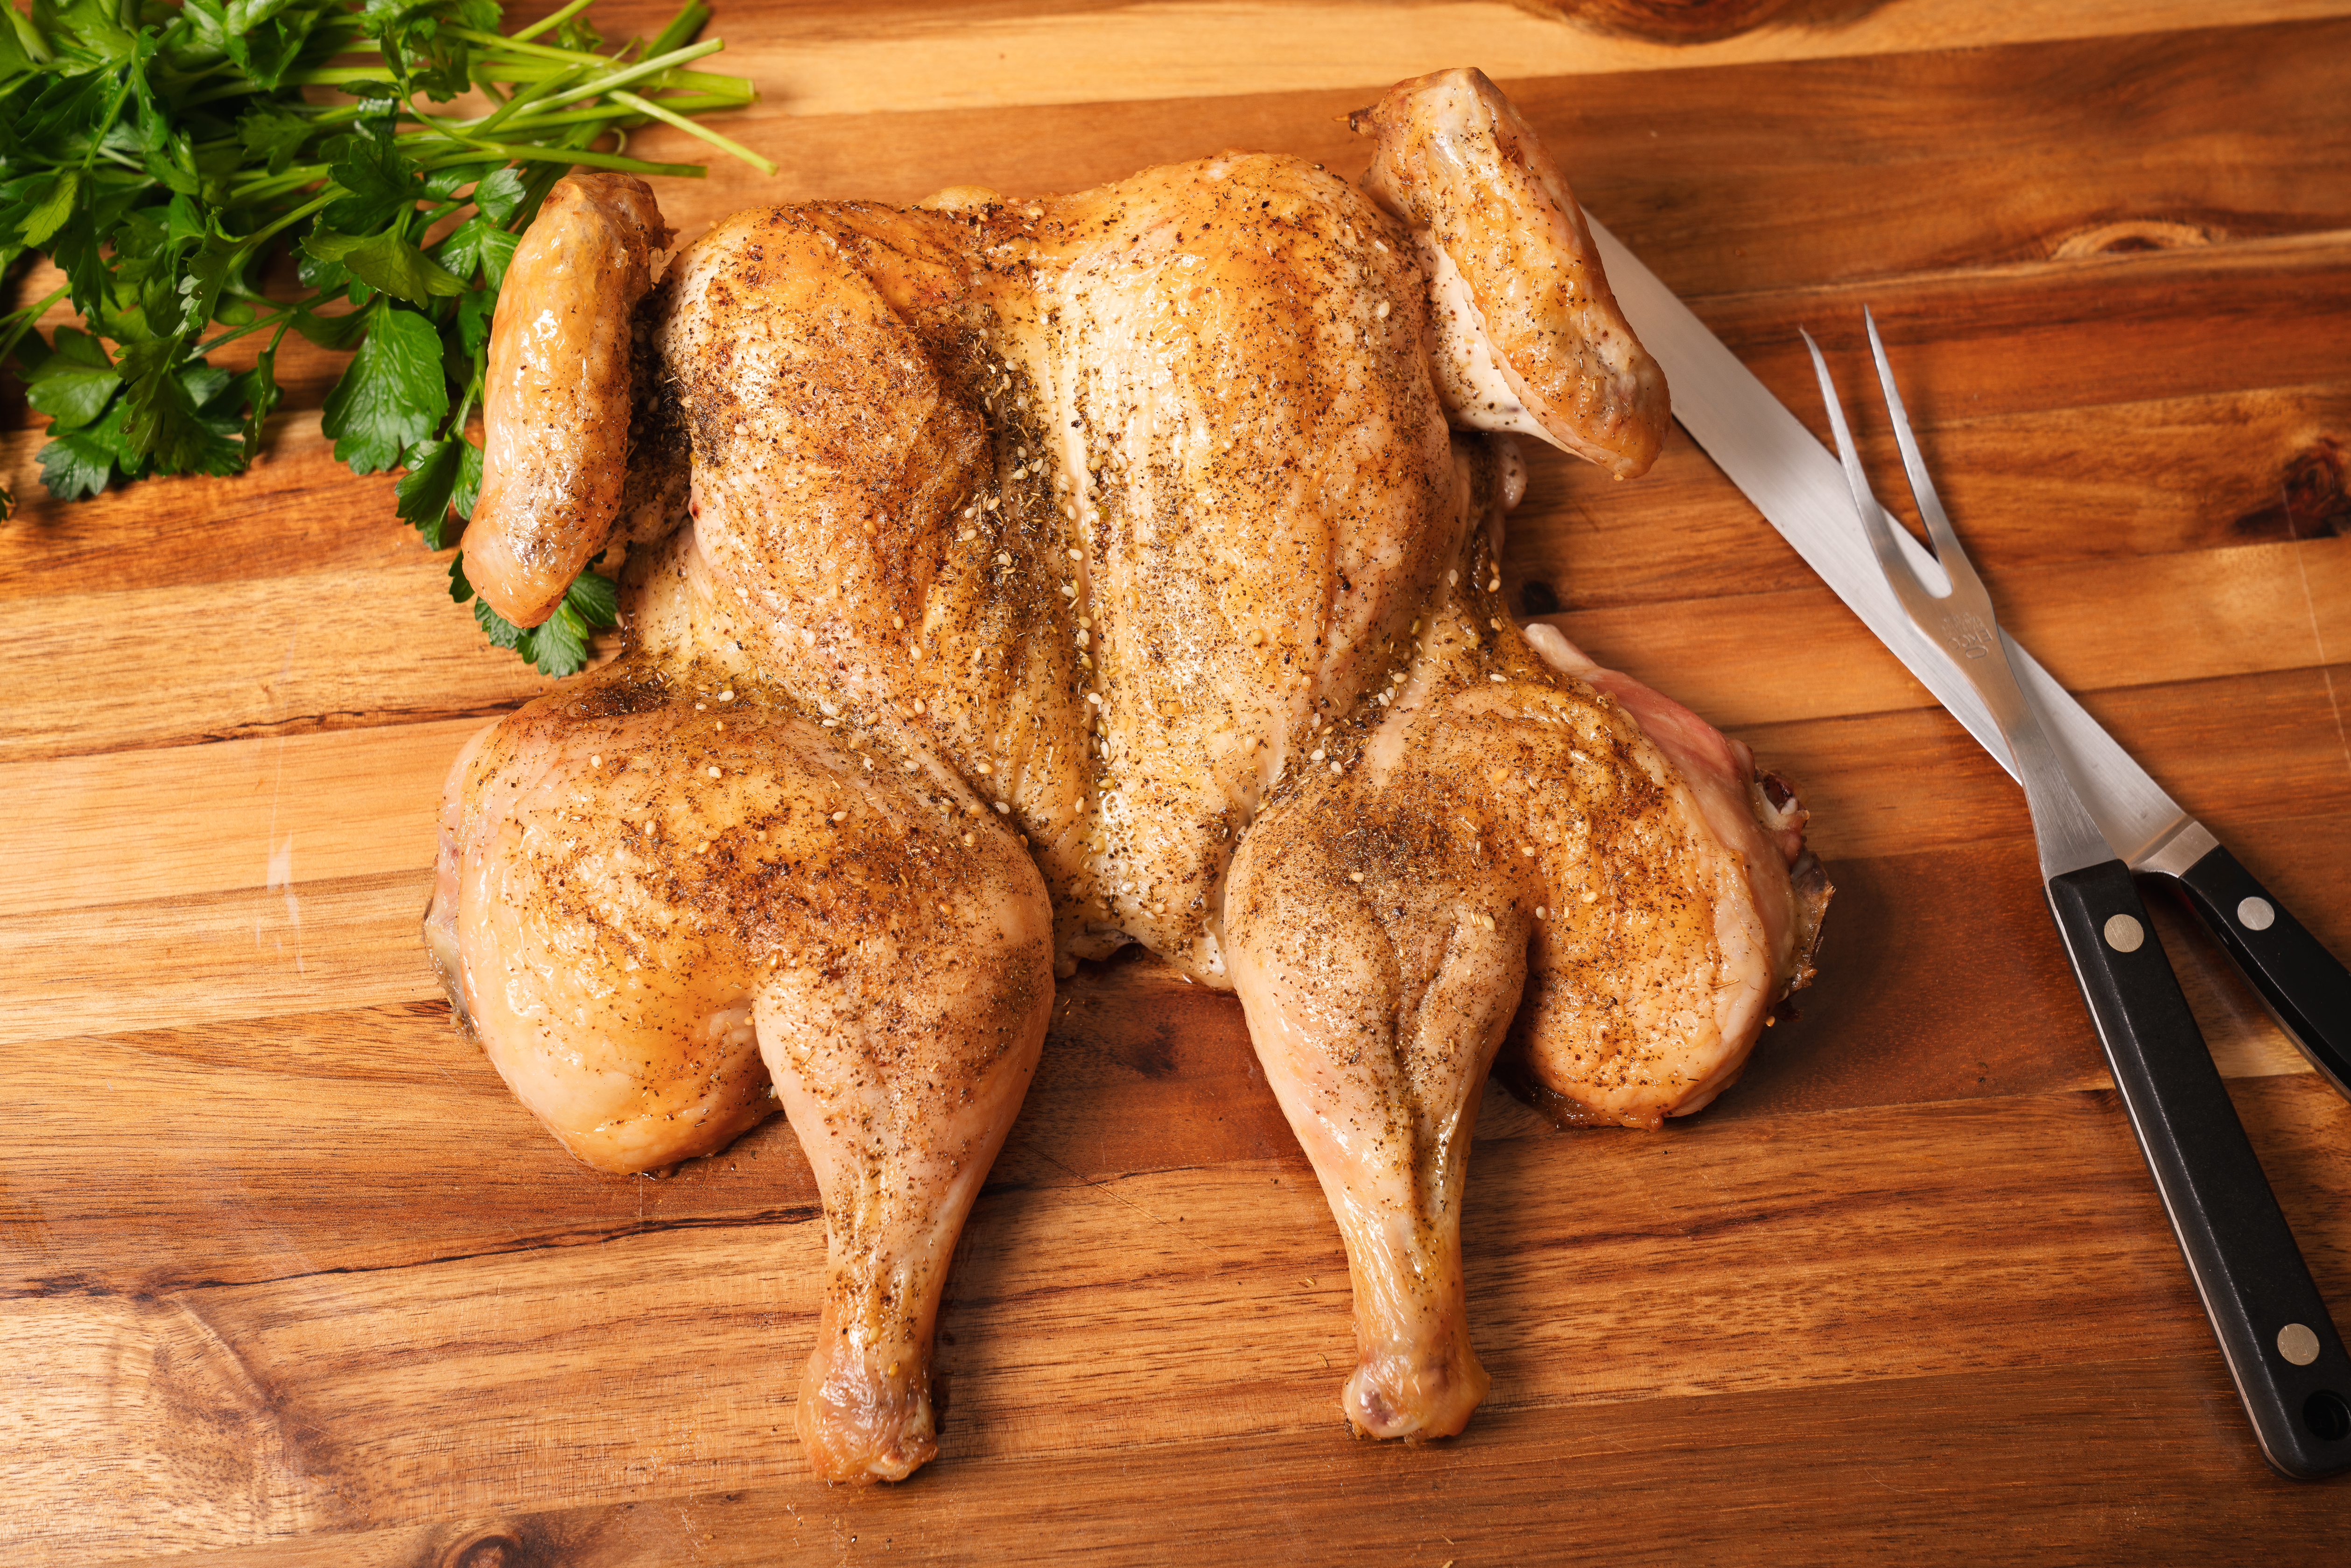 Why You Need to Dry Brine Your Turkey and Chicken